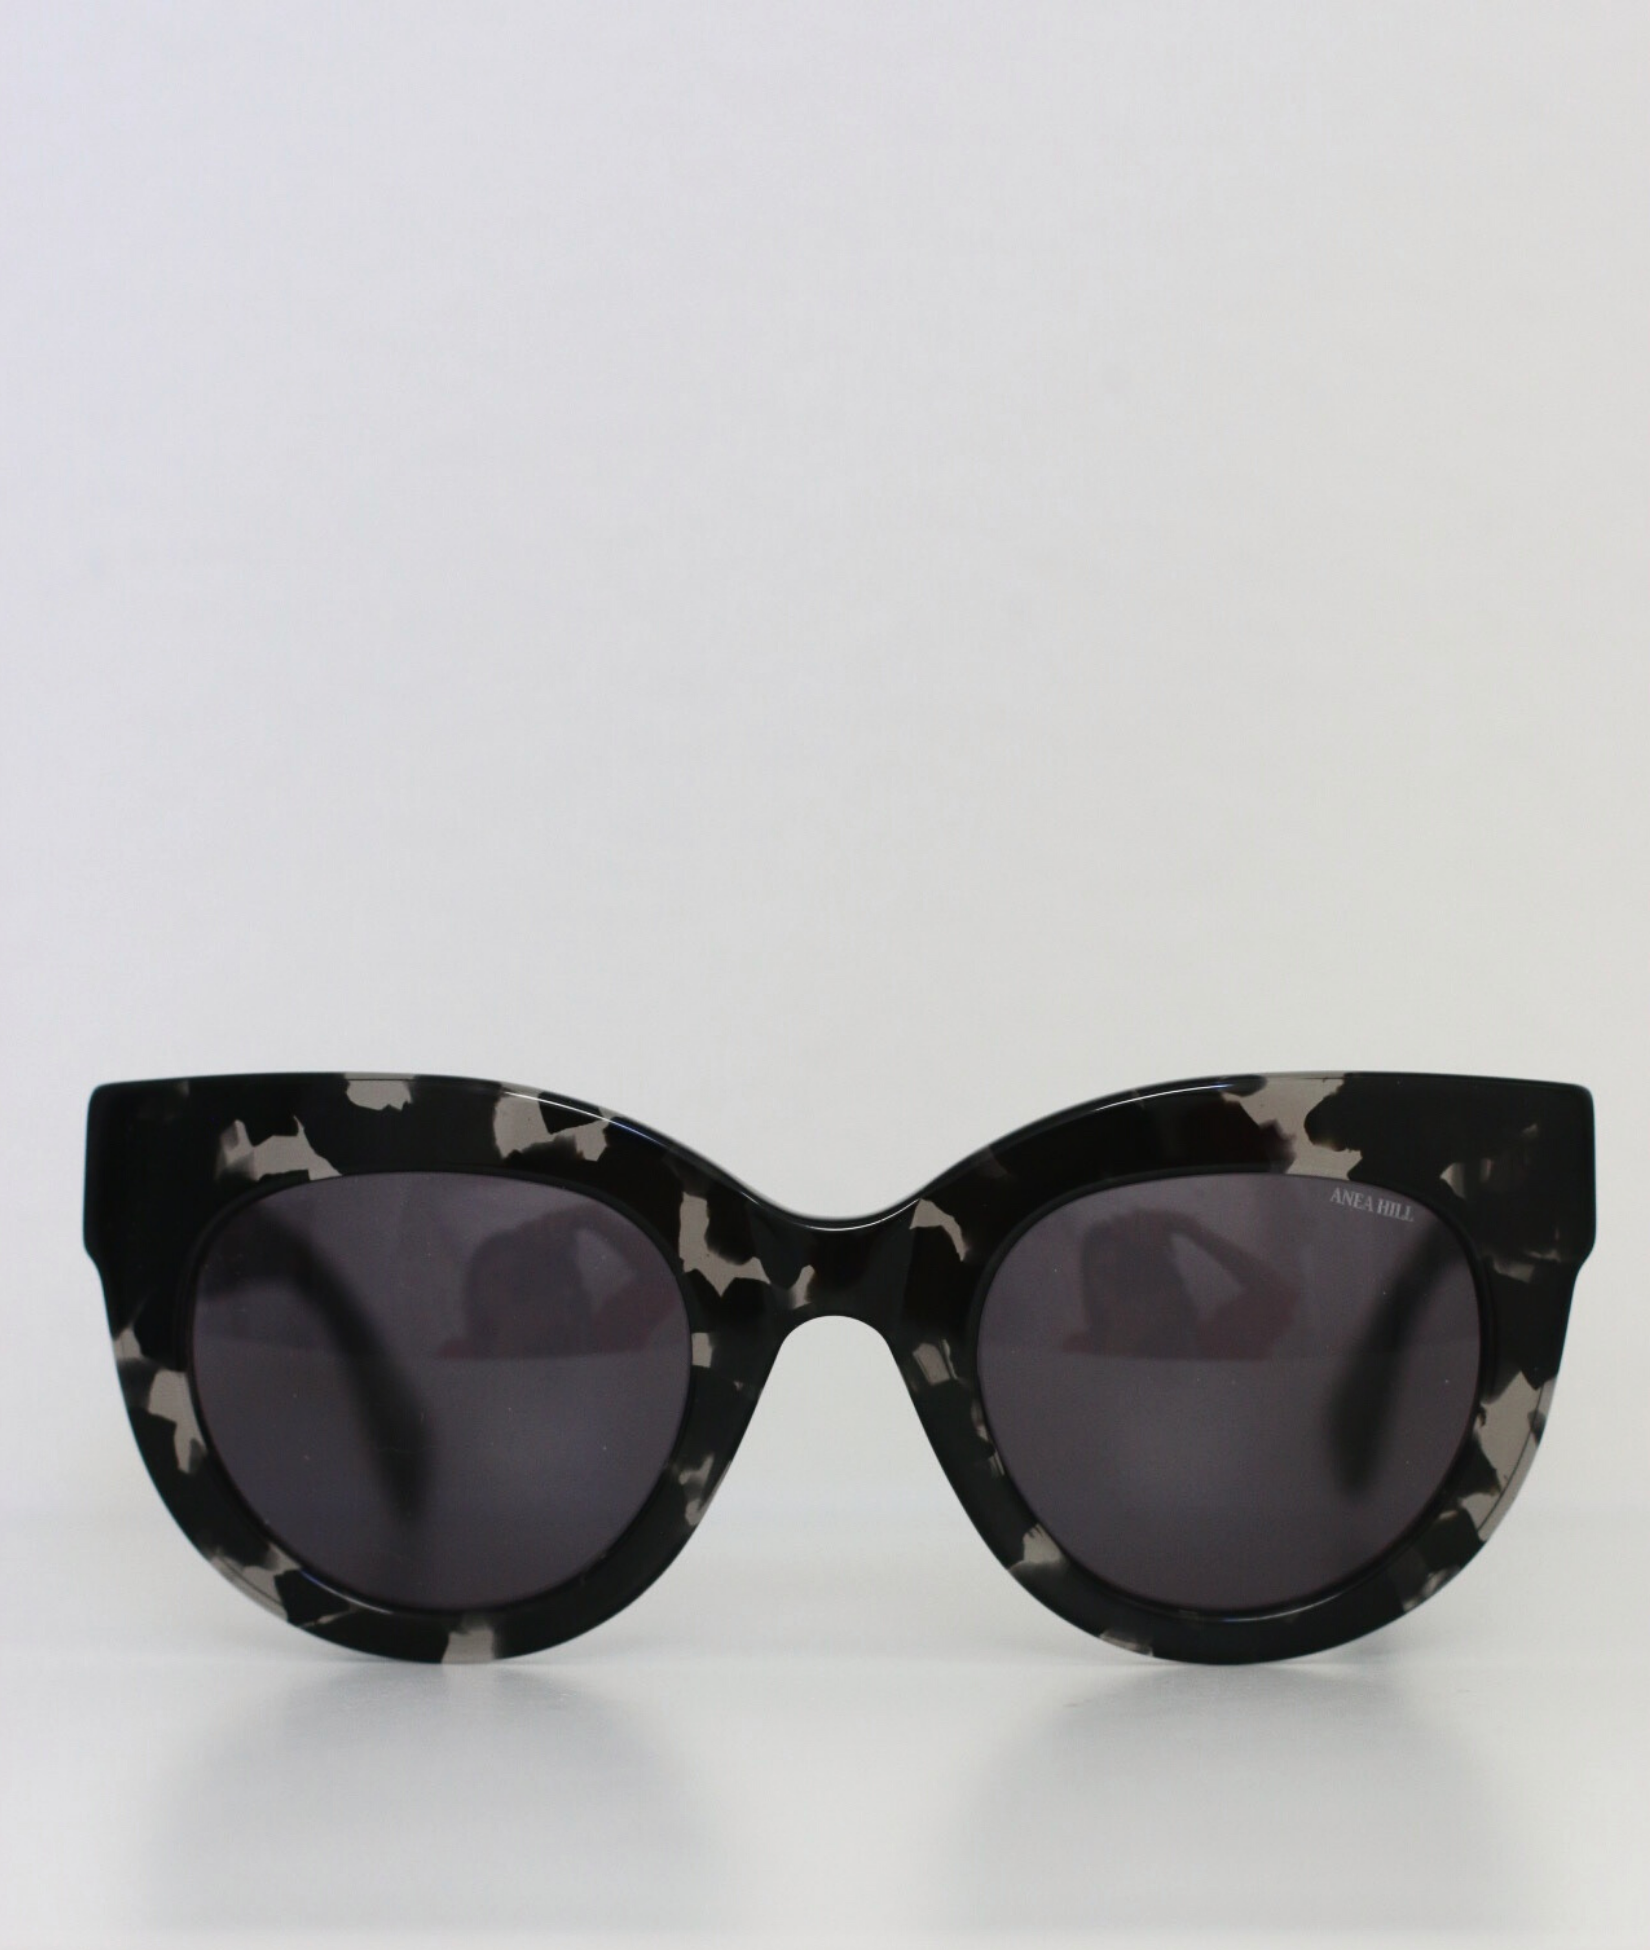 Handcrafted high-end women's sunglasses featuring oversized cat-eye frames with clear tortoise acetate material